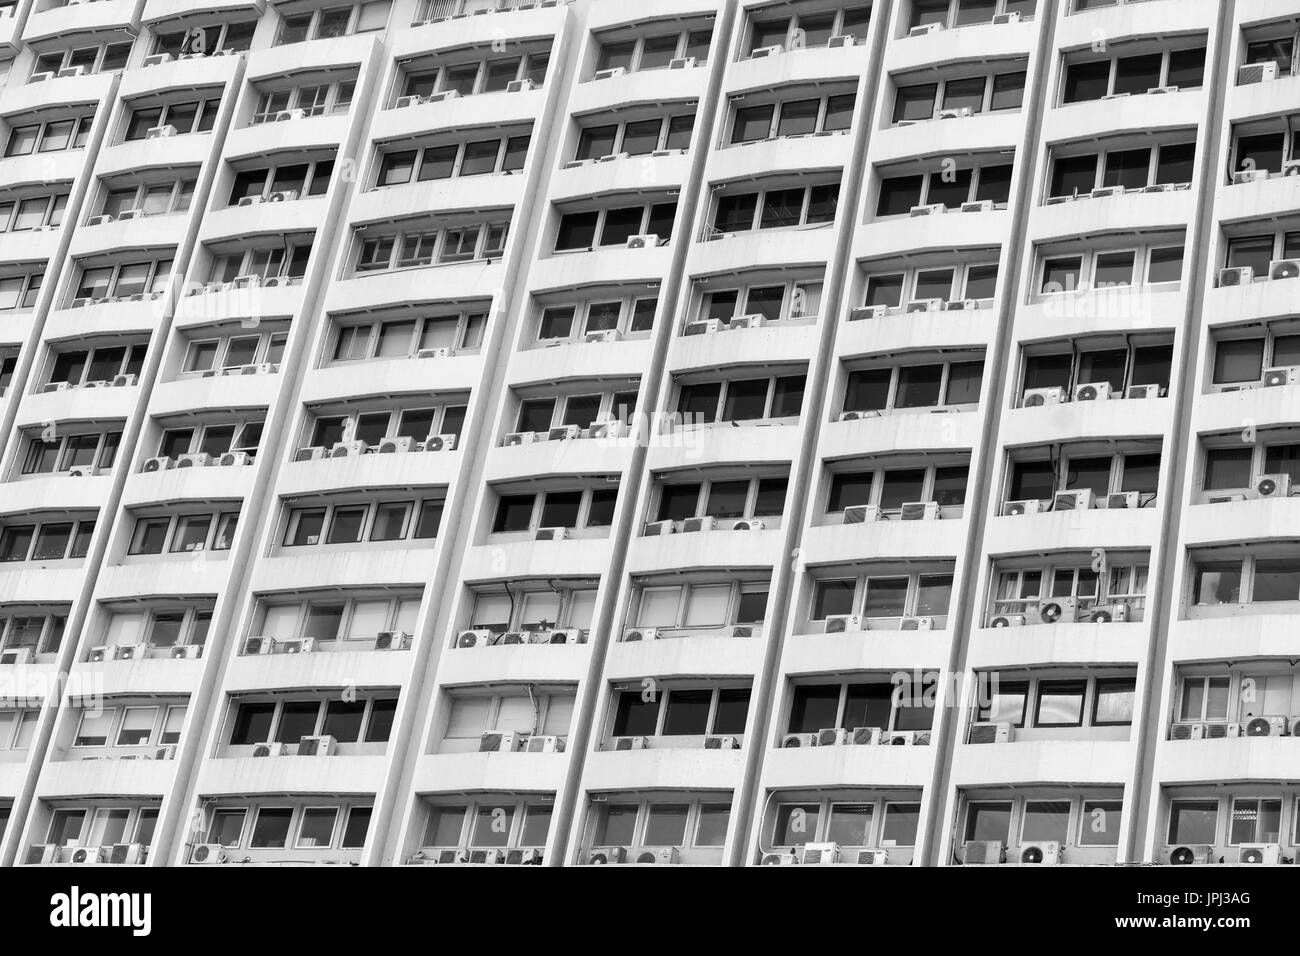 Air conditioners mounted on most windows of a high rise residential building in Hong Kong Stock Photo